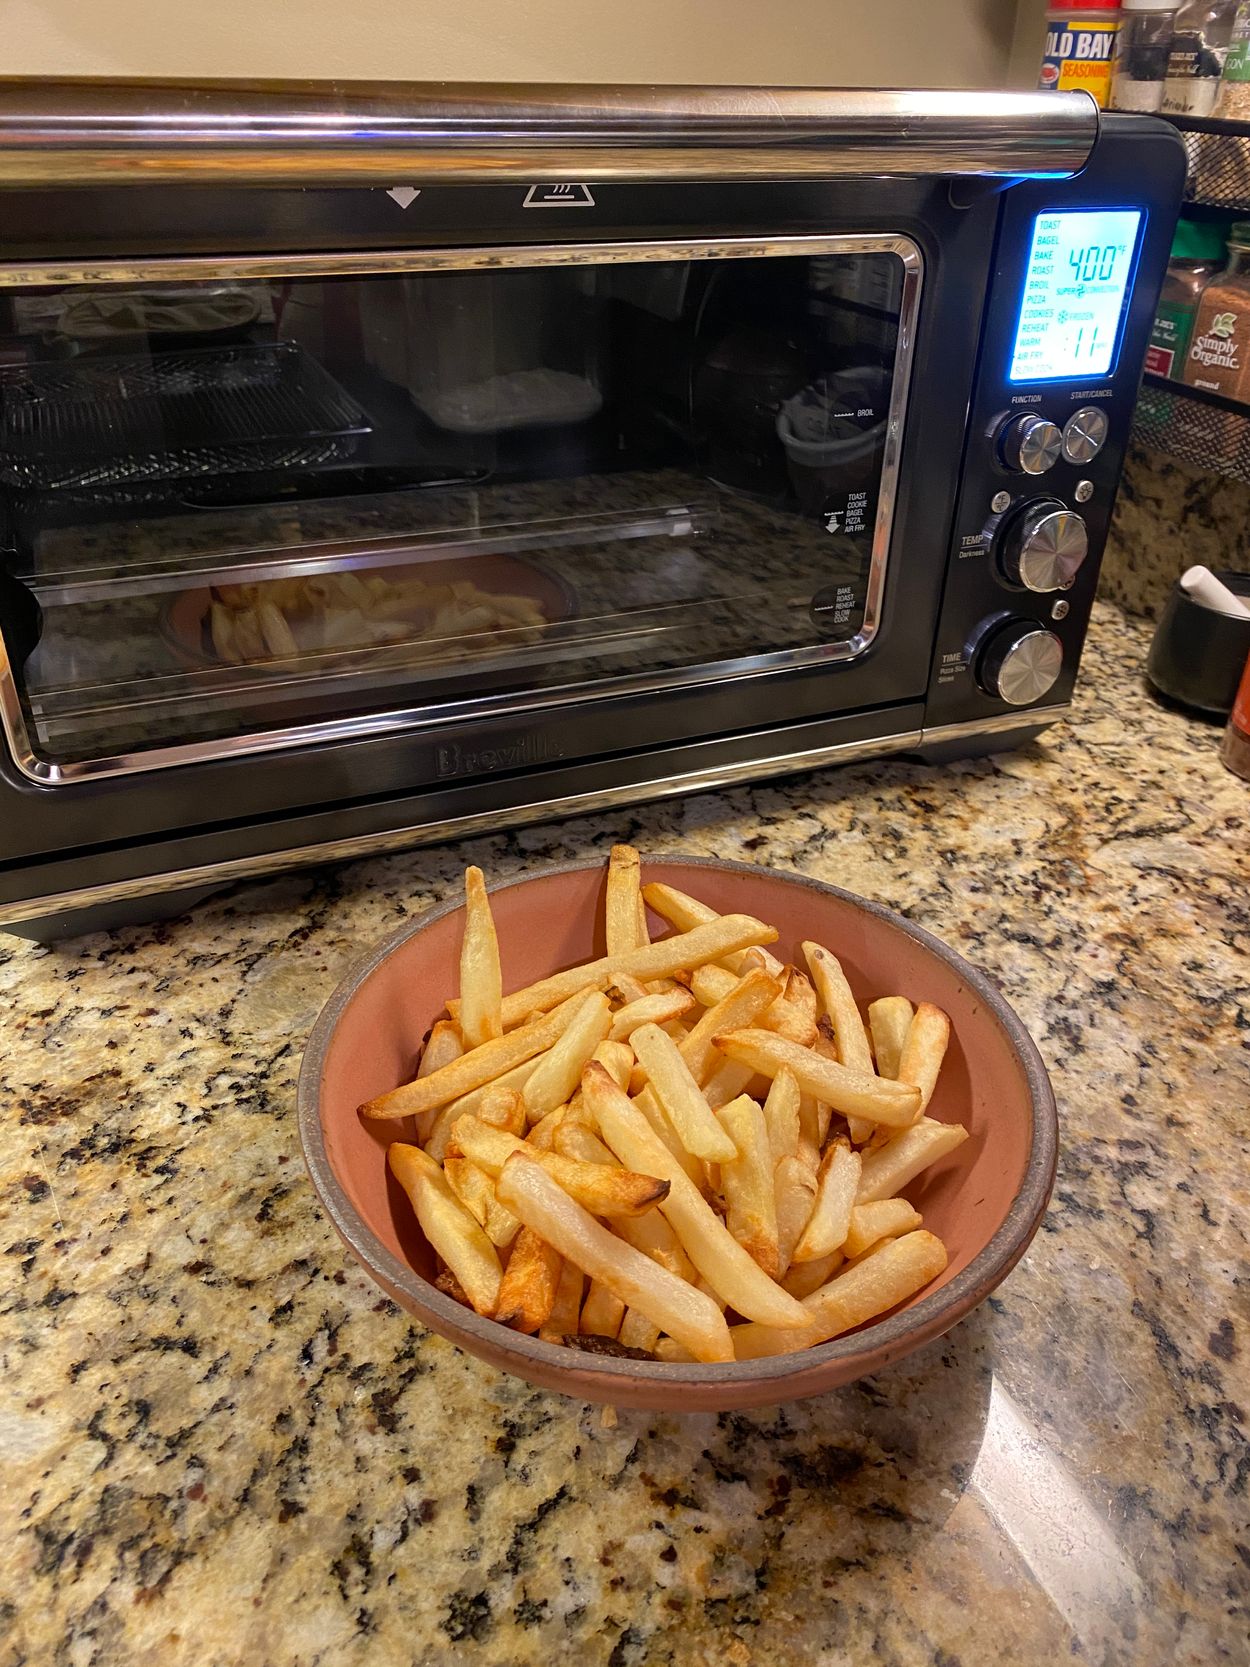 The 5 Best Air Fryer Toaster Ovens (2023 Review) - This Old House